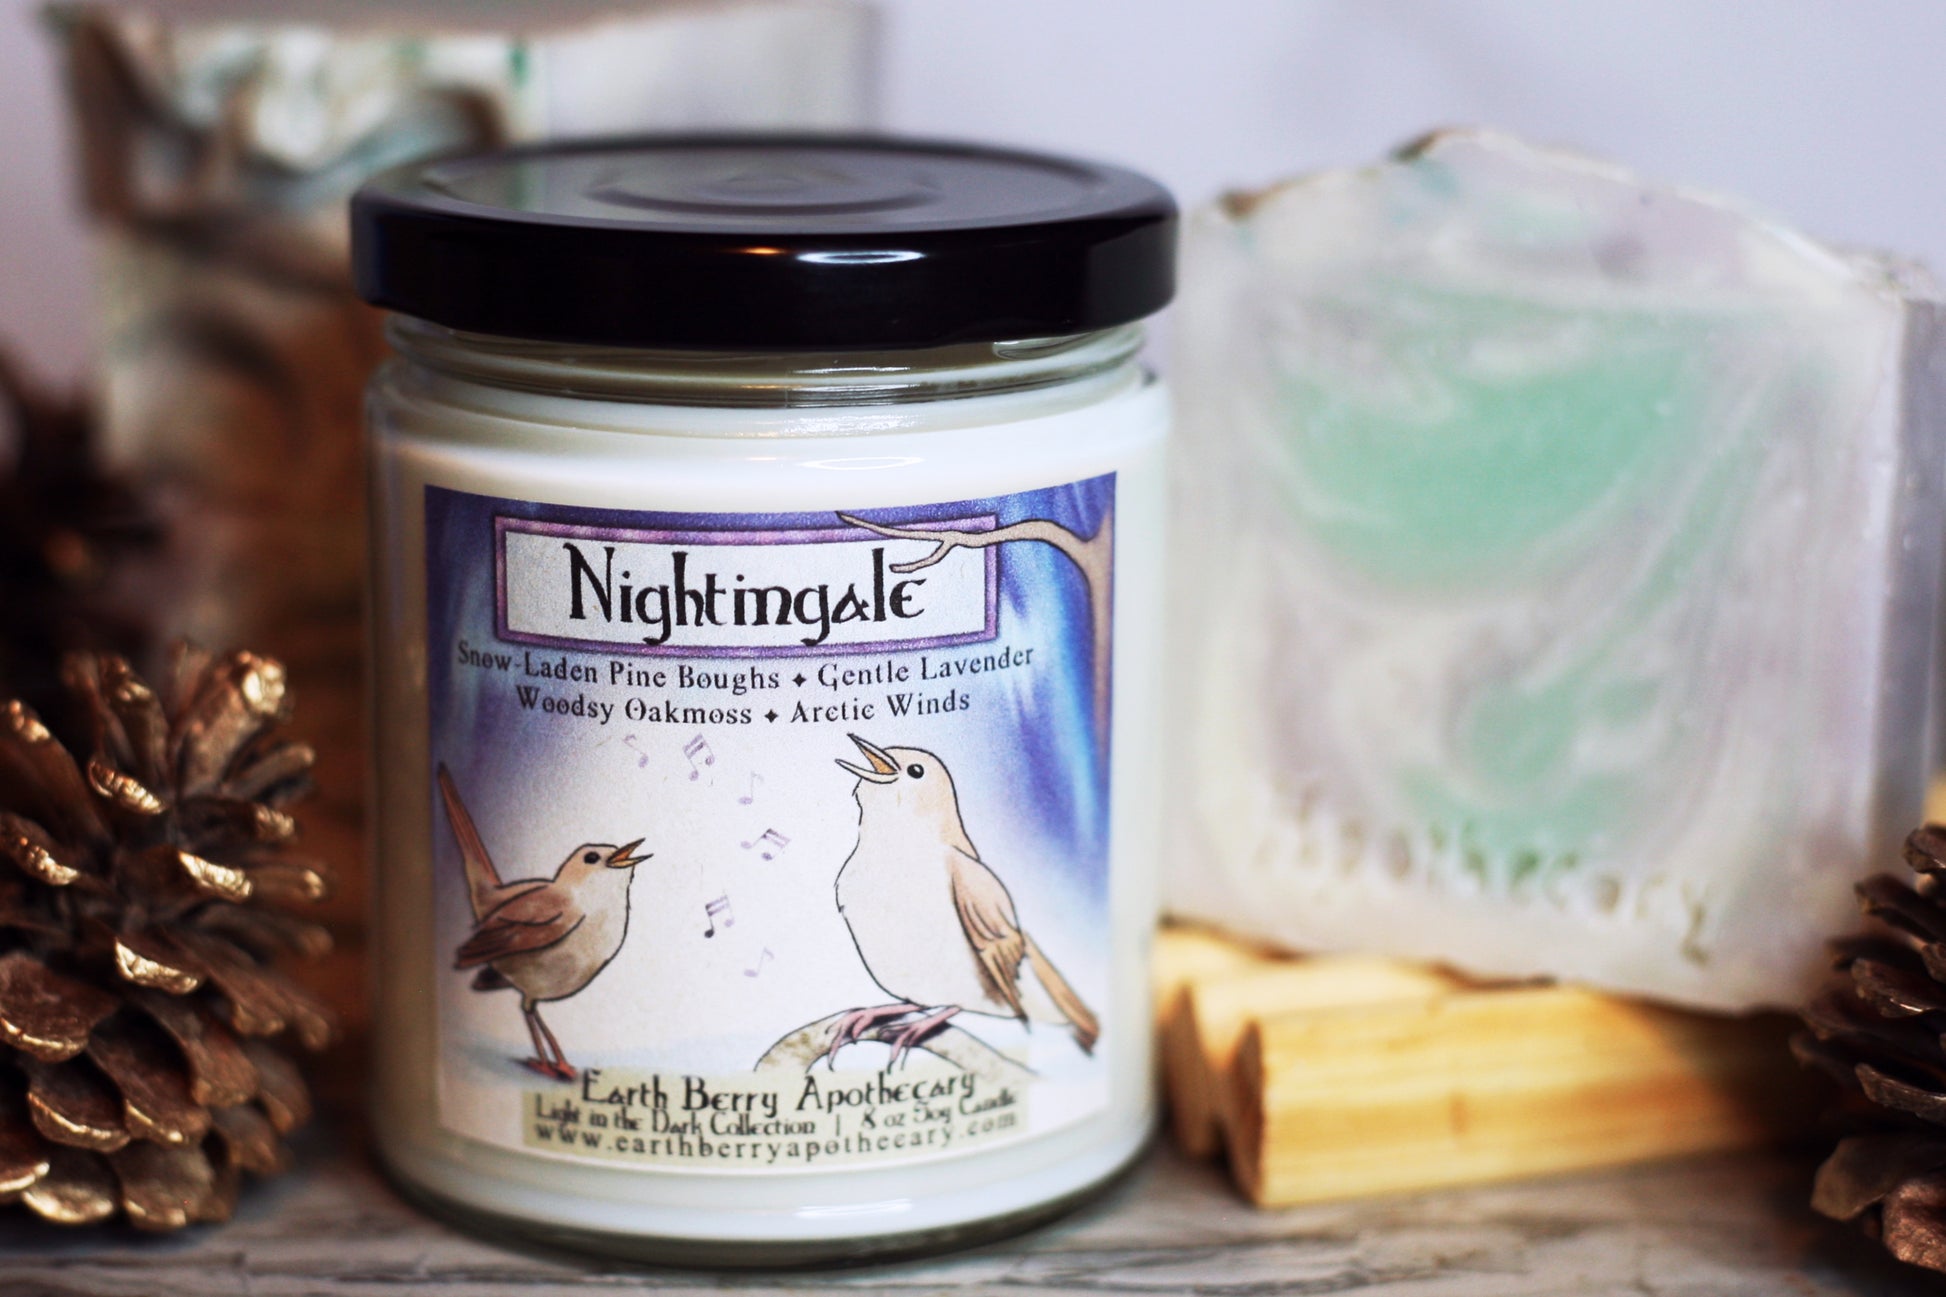 Nightingale handmade soap and soy candle bundle. The scent is pine and lavender. The soap has green, purple, and white swirls. The candle has two birds singing in front of the northern lights